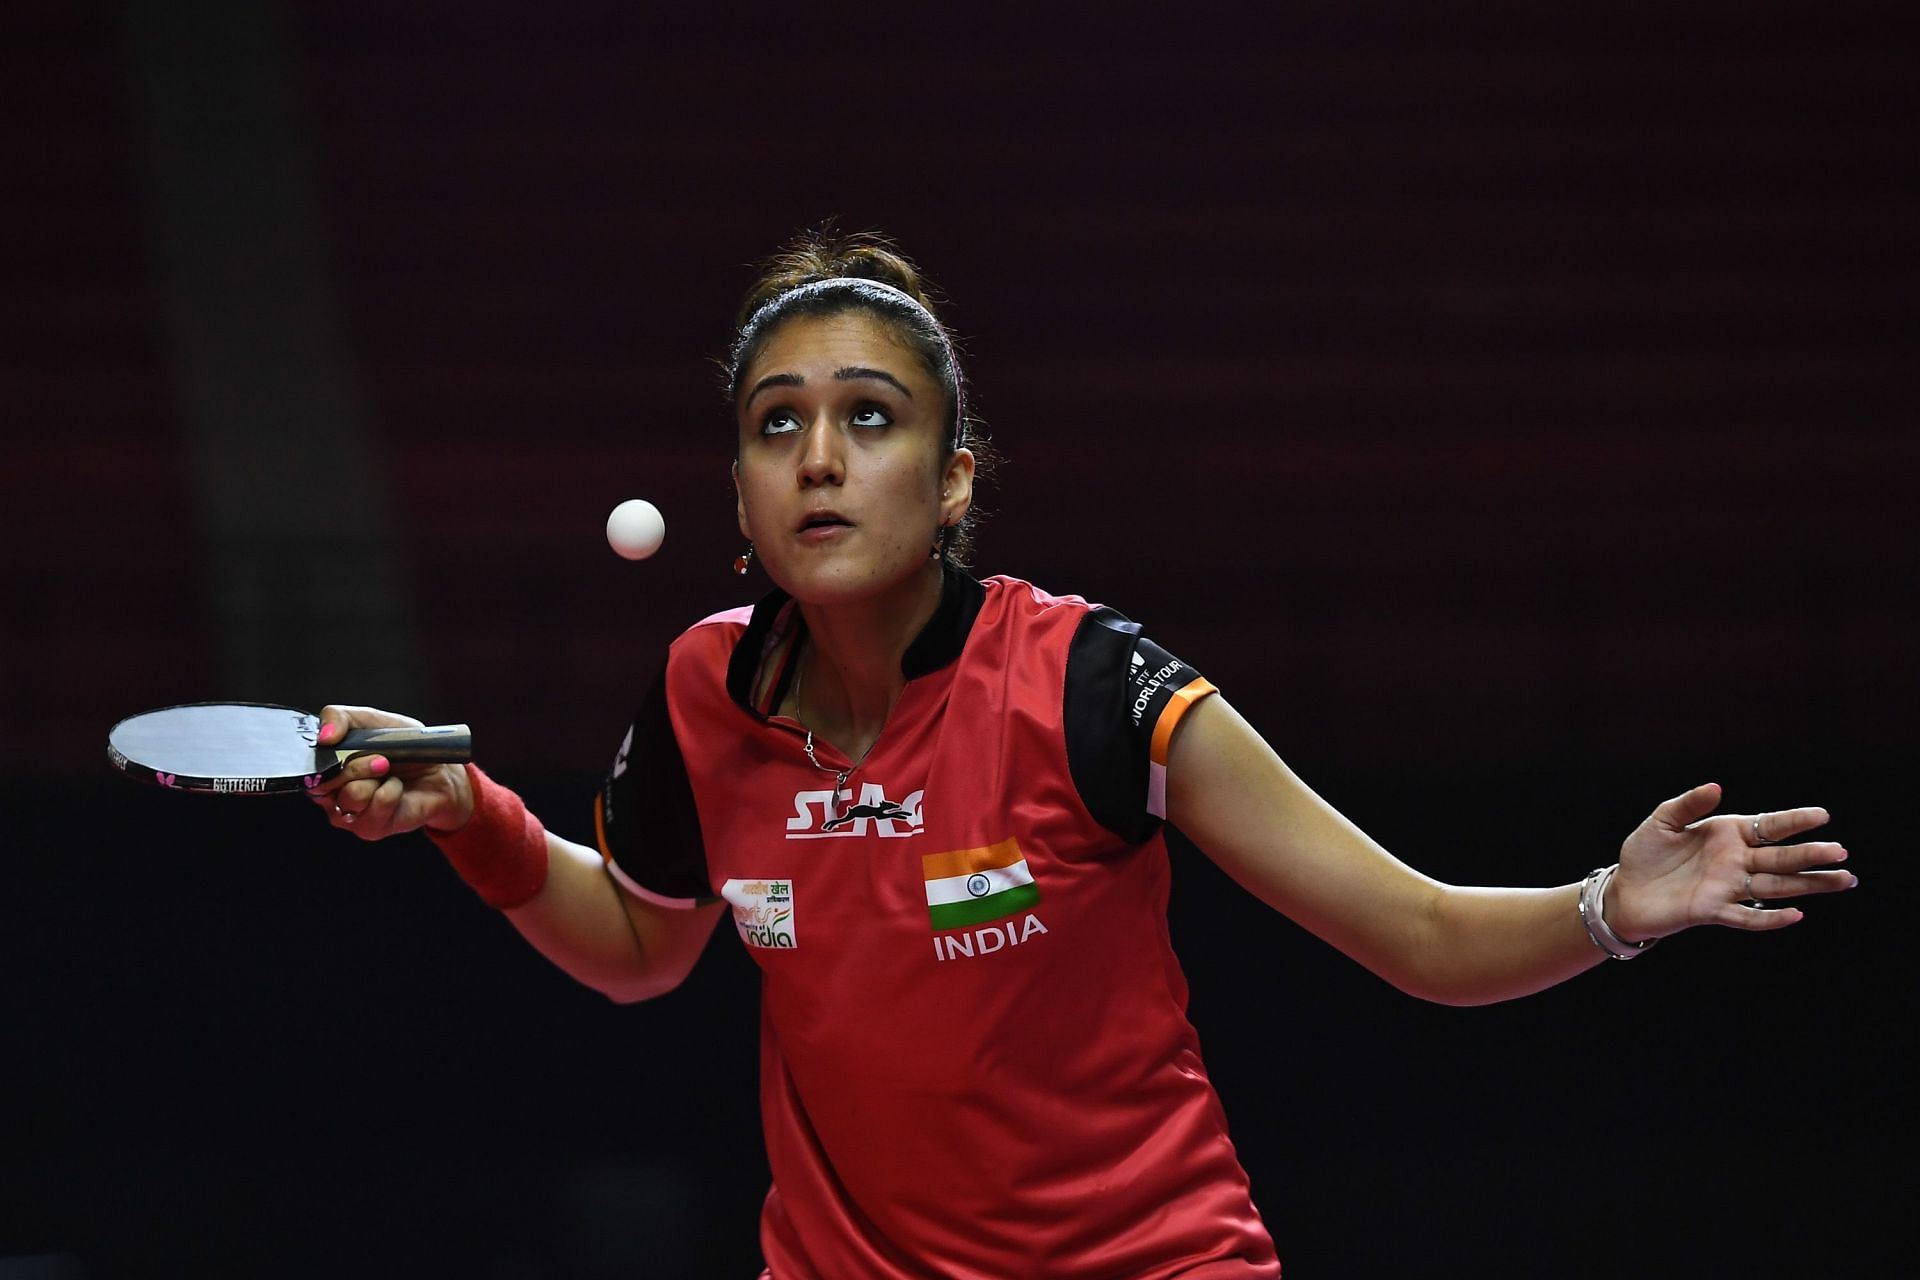 Indian table tennis player Manika Batra. (PC: Getty Images)